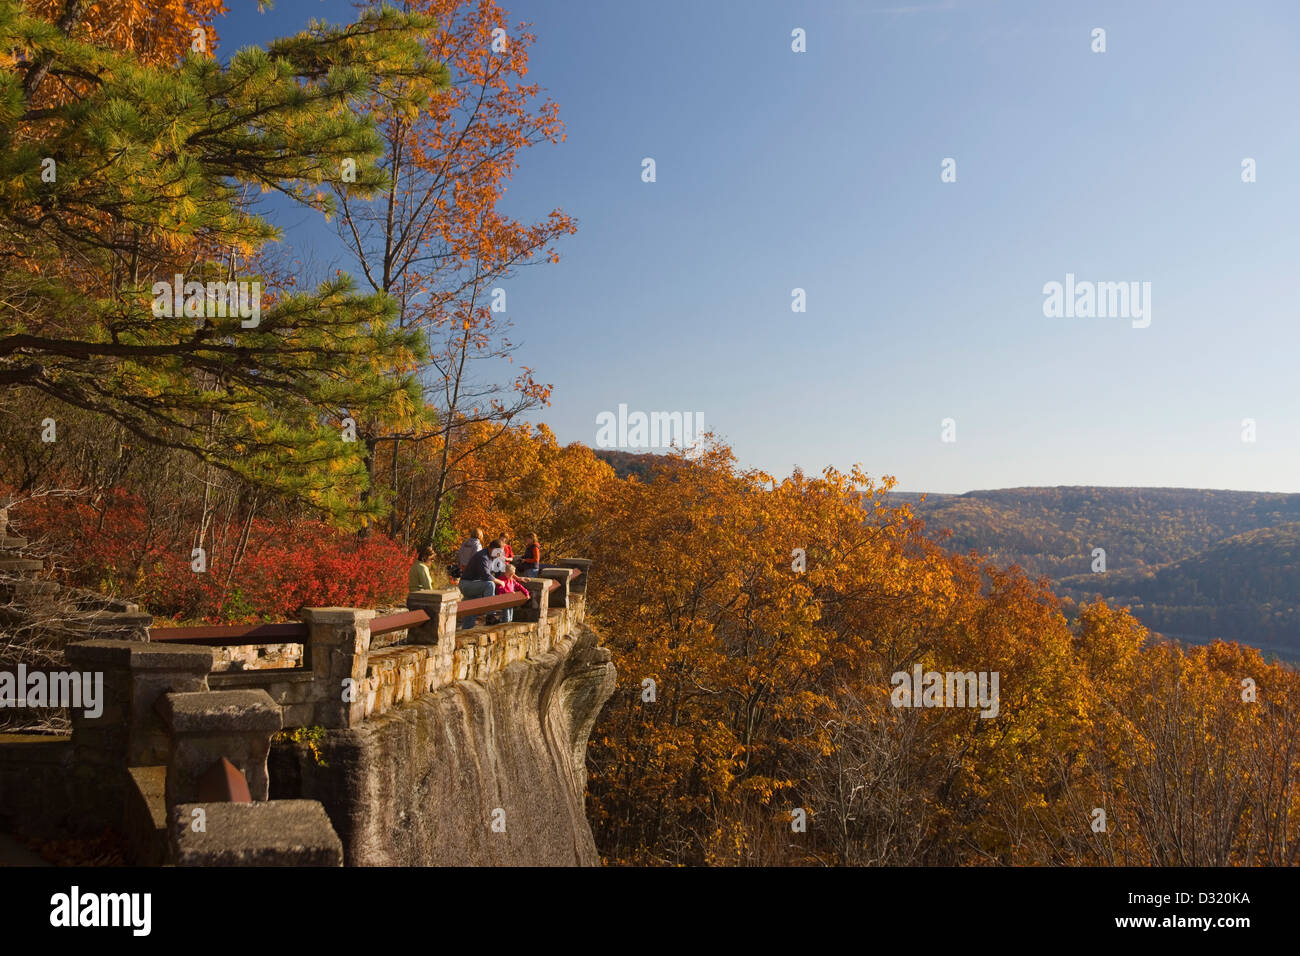 FALL FOLIAGE KINZUA SCENIC OVERLOOK ABOVE ALLEGHENY RESERVOIR ALLEGHENY NATIONAL FOREST PENNSYLVANIA USA Stock Photo